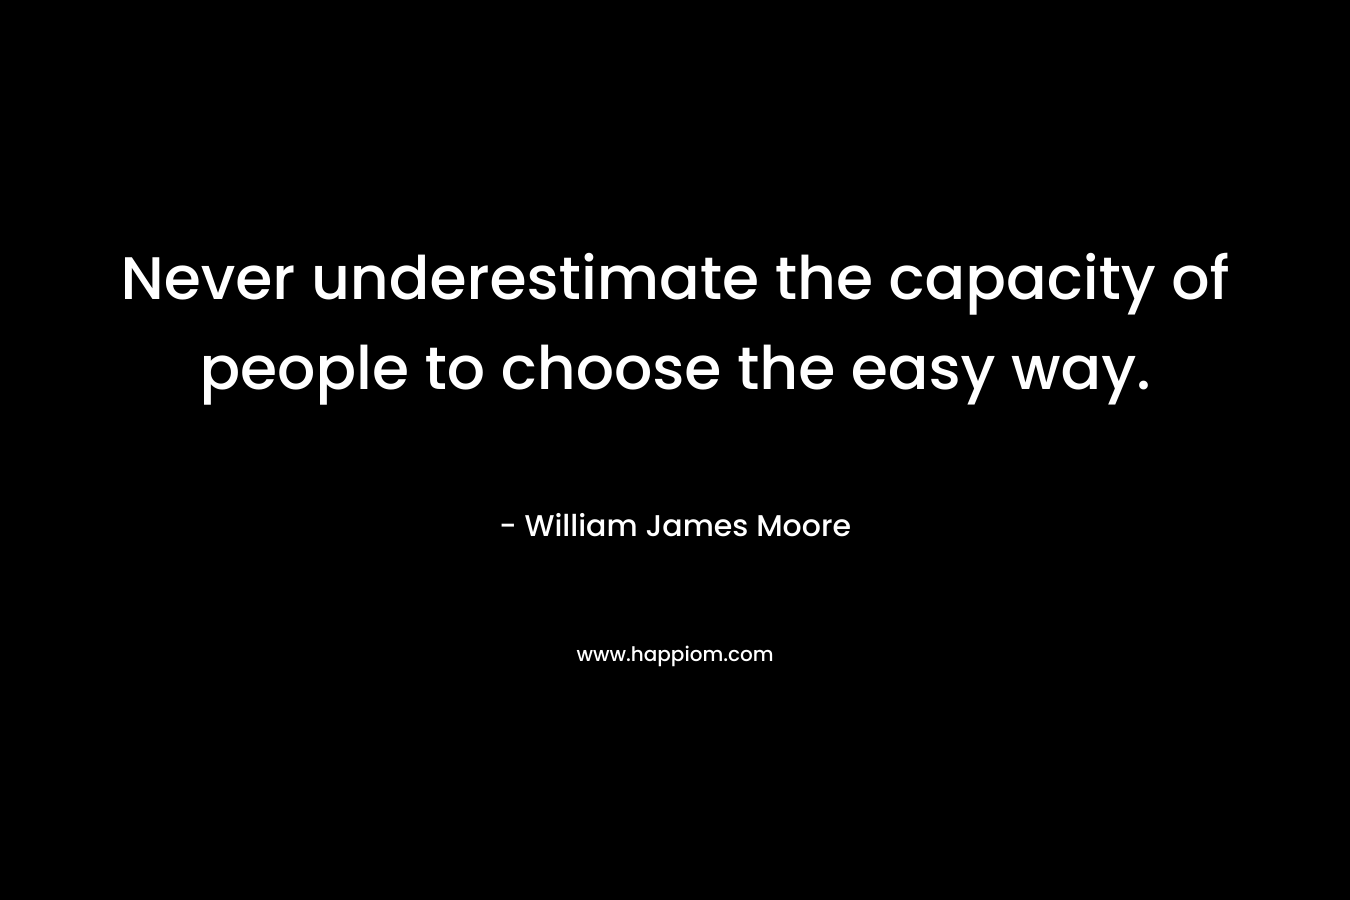 Never underestimate the capacity of people to choose the easy way.